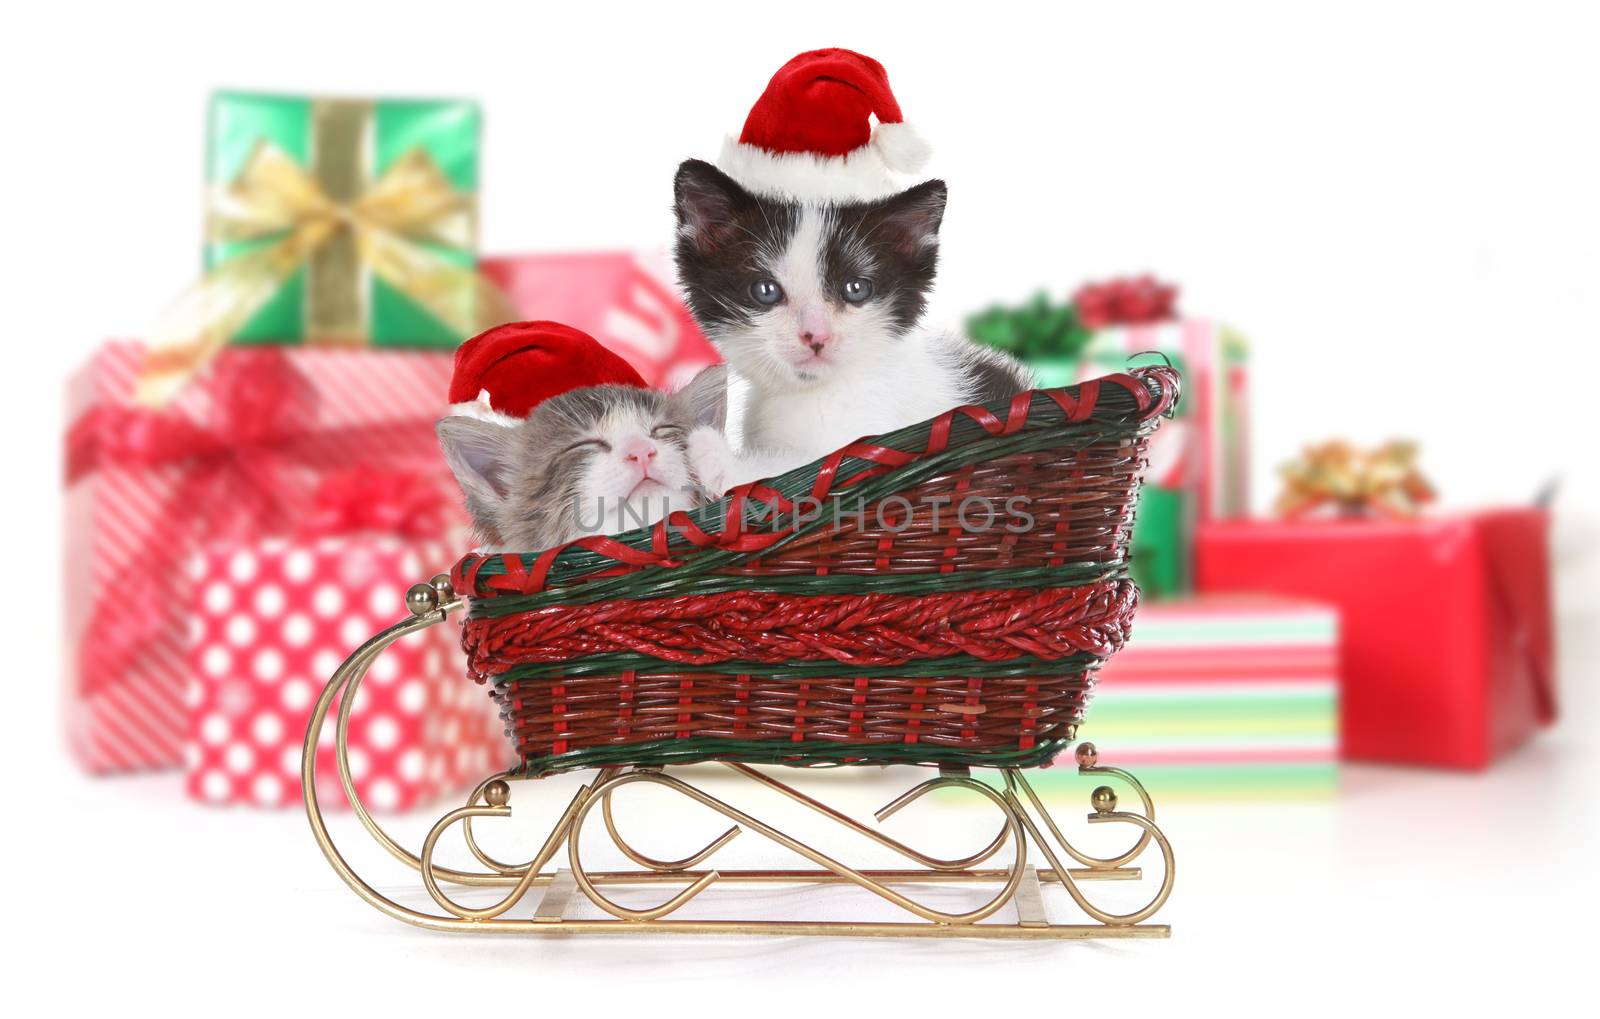 Adorable Kittens Surrounded by Christmas Gifts in Sleigh by tobkatrina